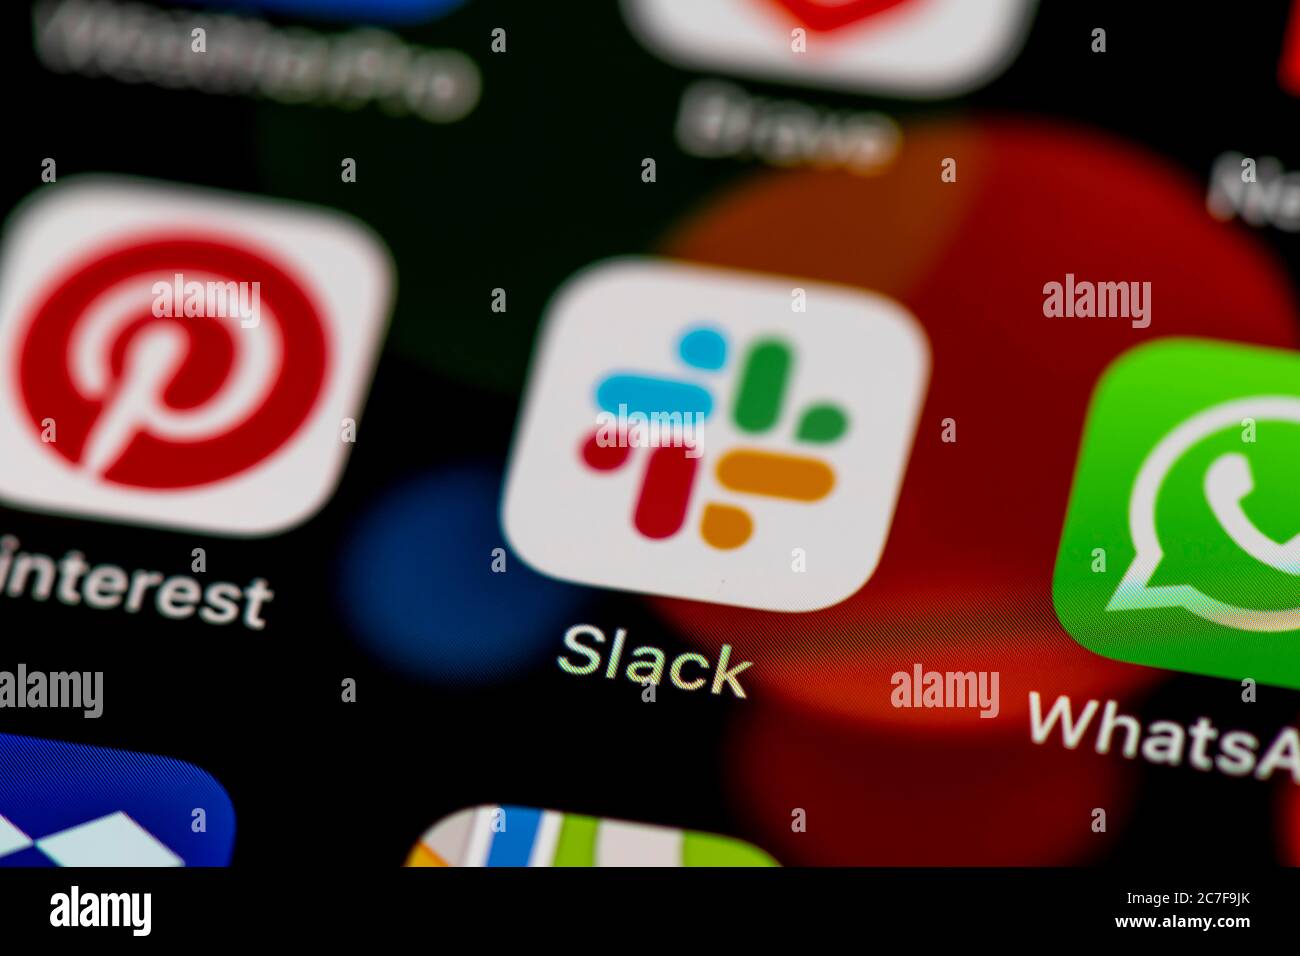 Slack Icon, App Icons on a mobile phone display, iPhone, Smartphone, close-up Stock Photo